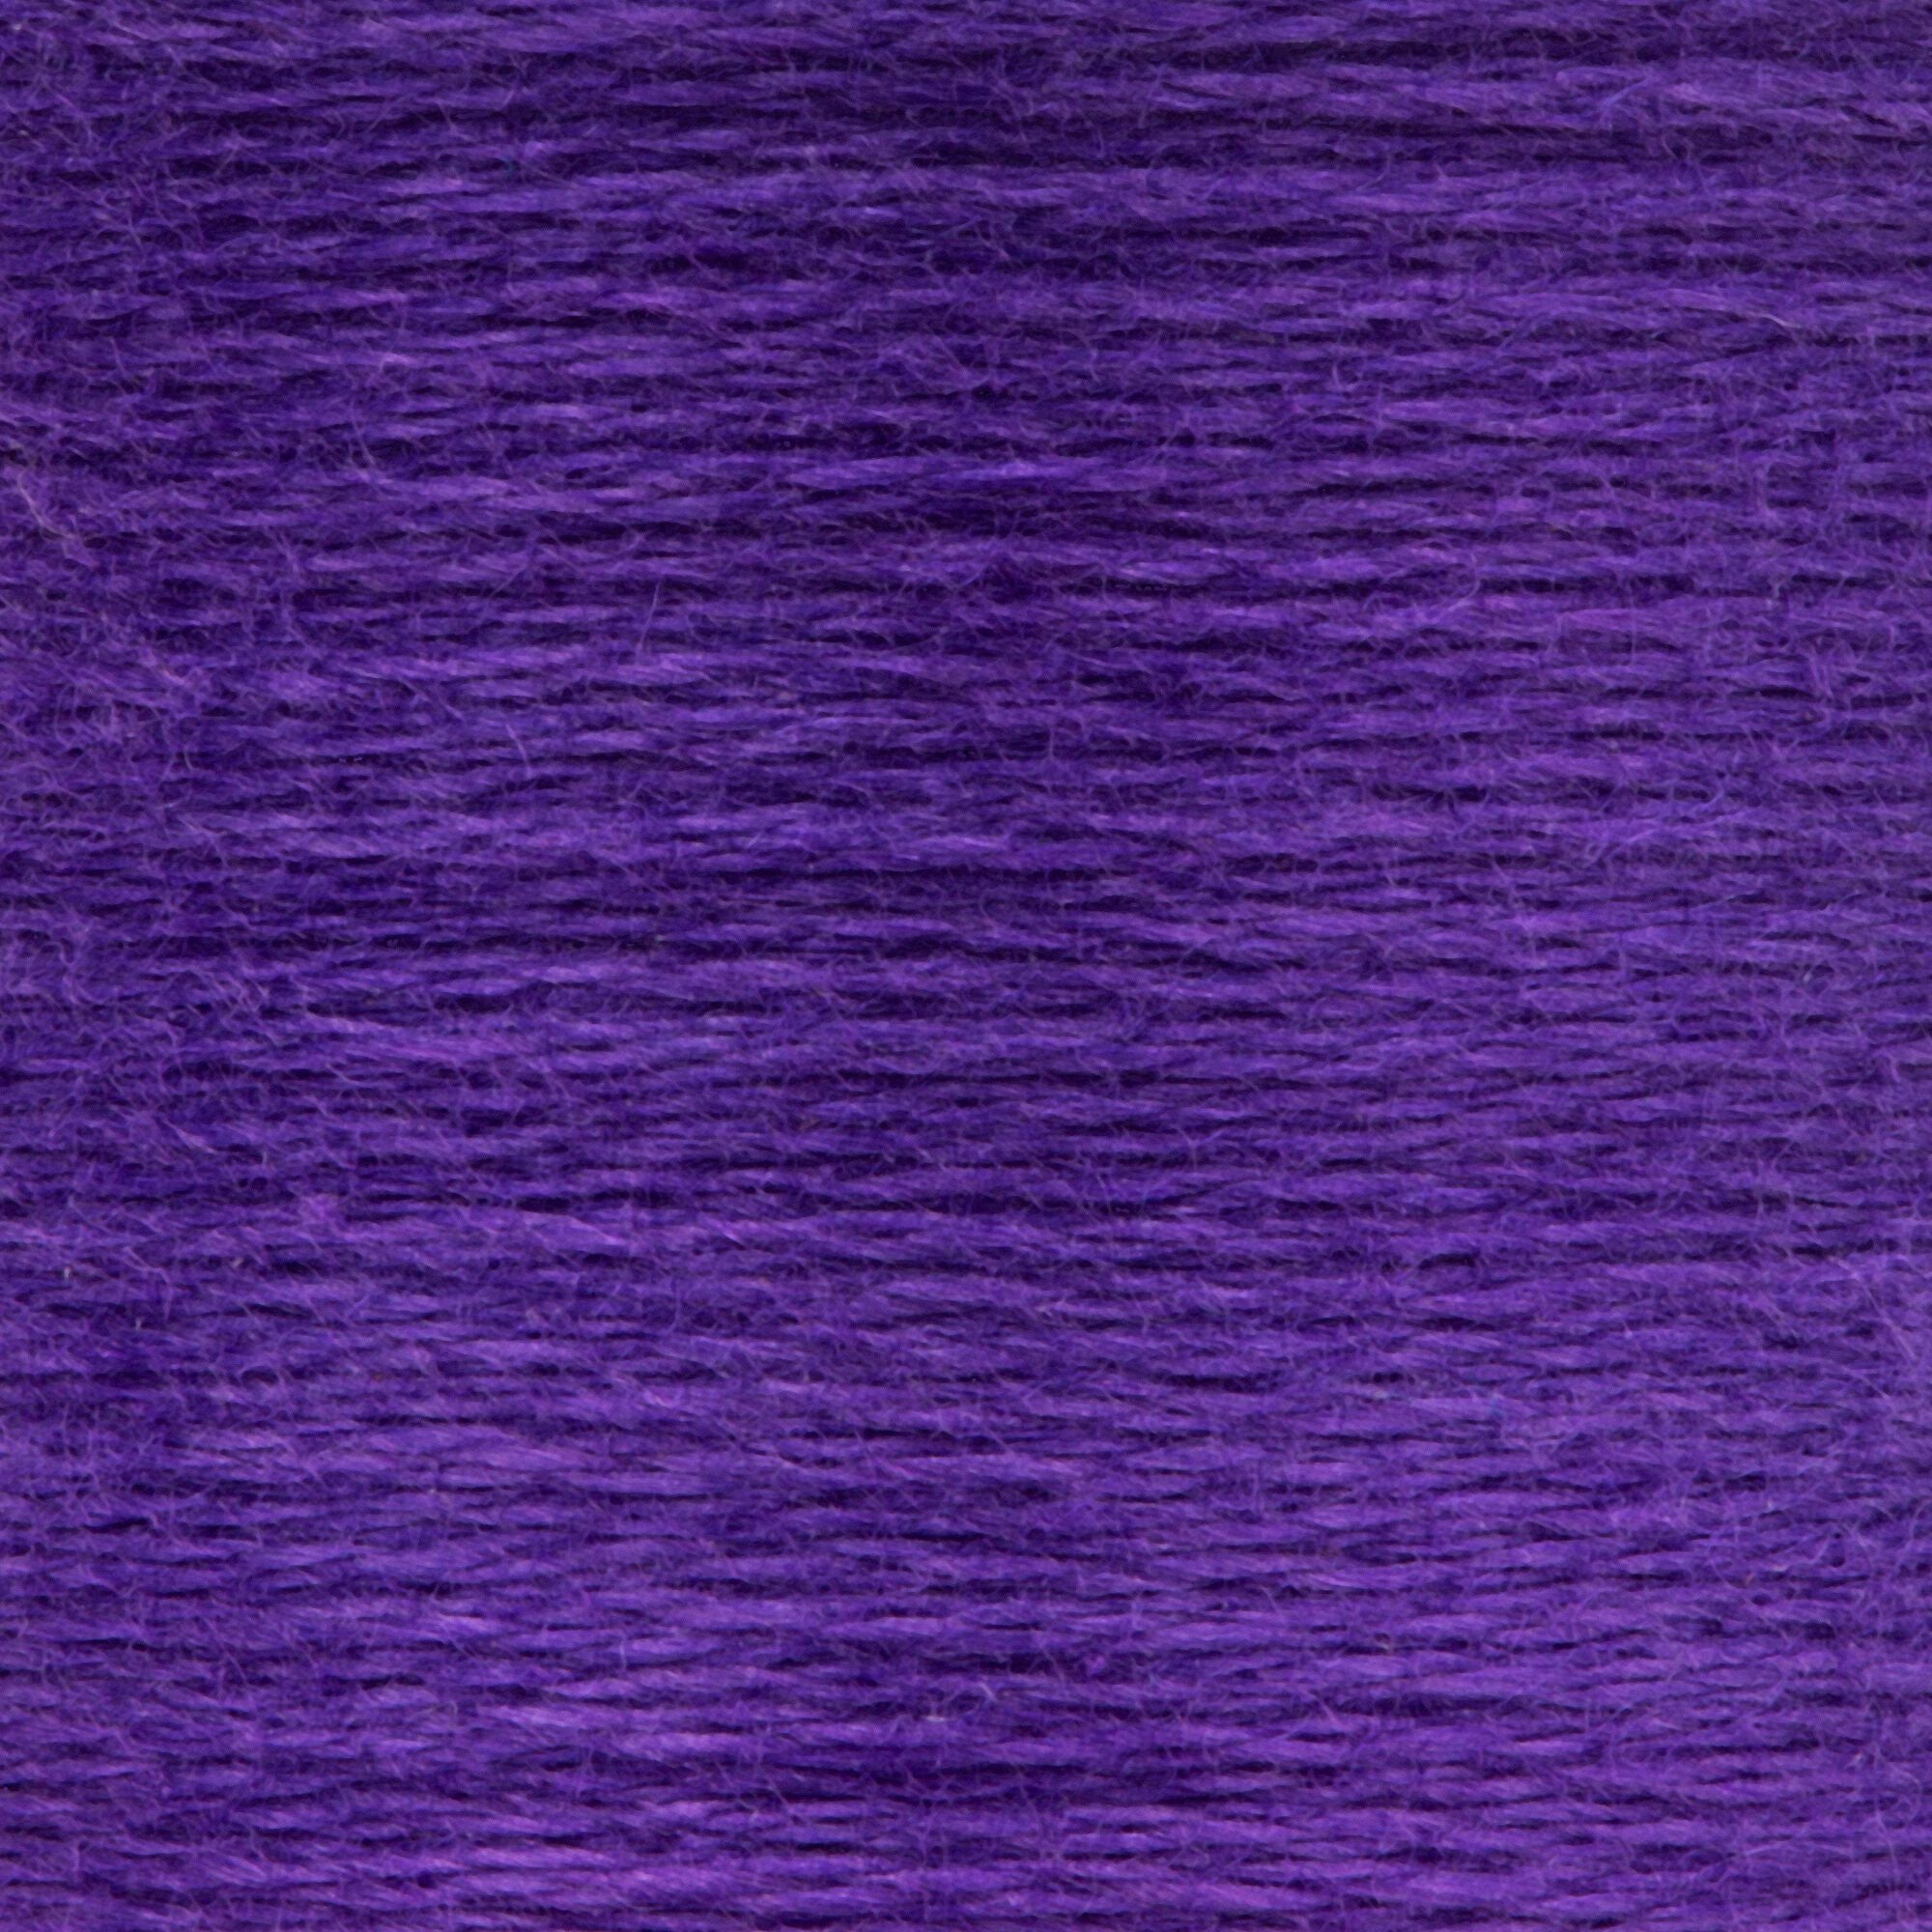 Anchor Embroidery Floss in Lavender Dk